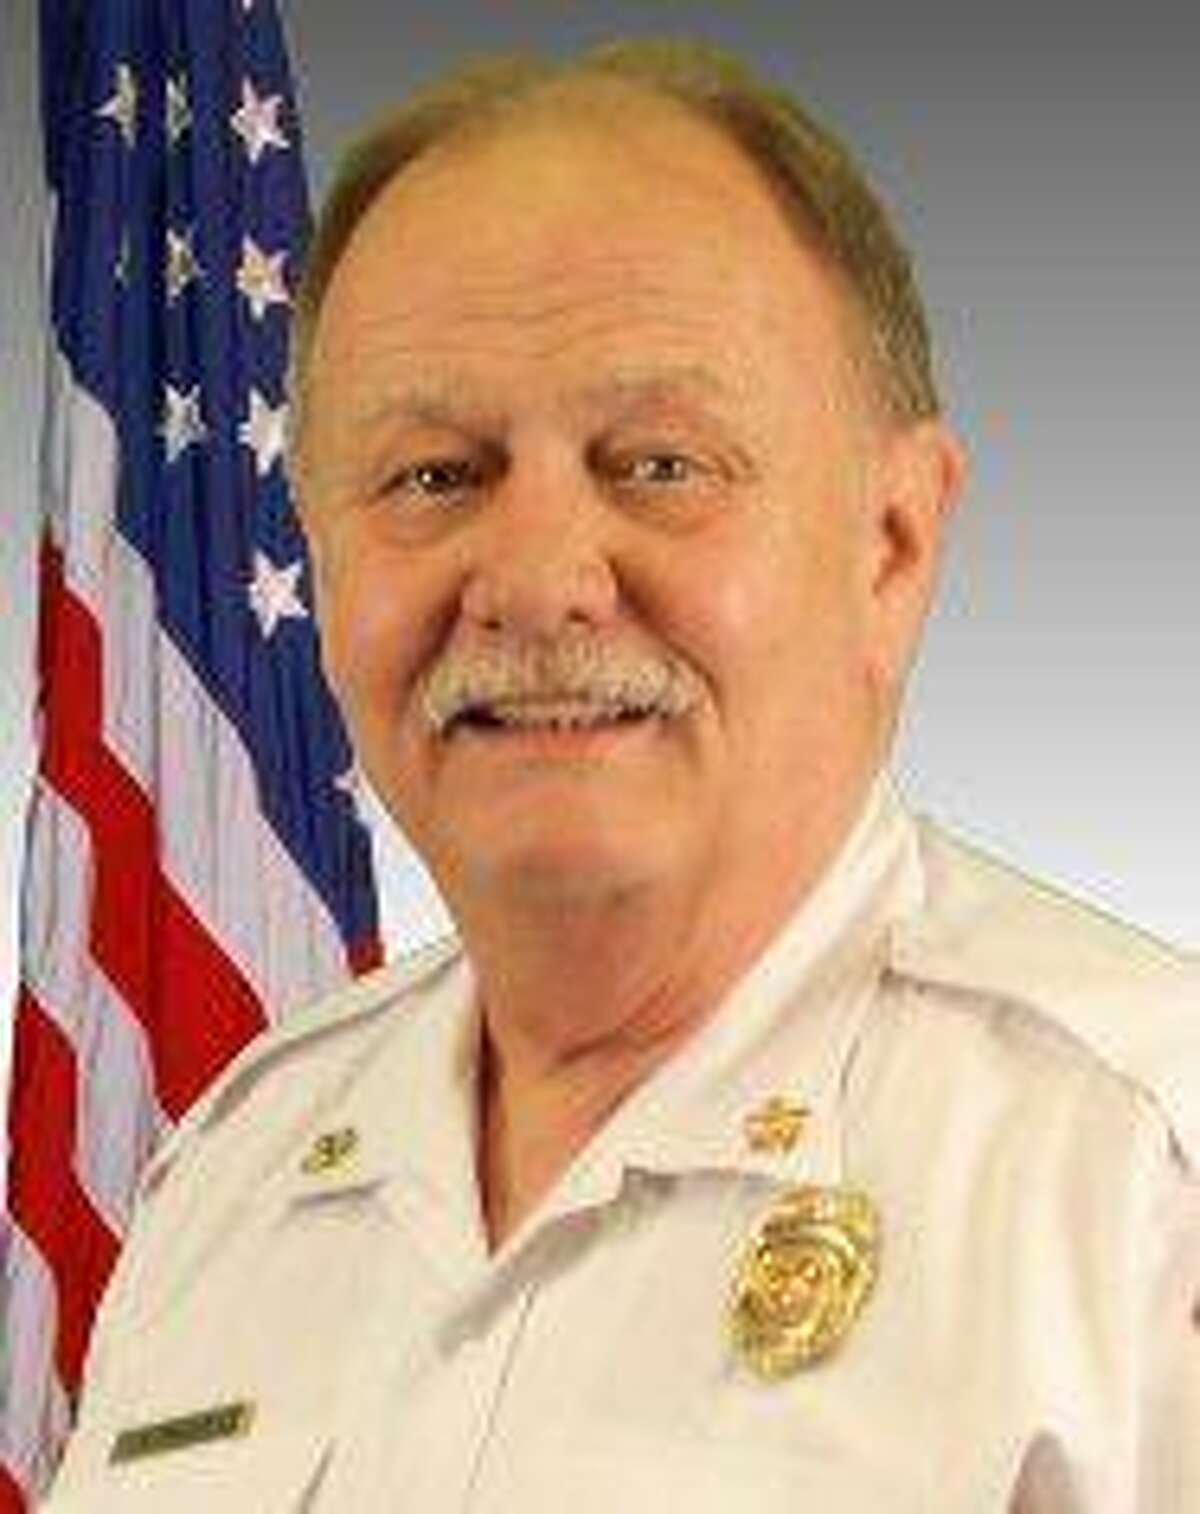 West University Place former Fire Chief Steve Ralls